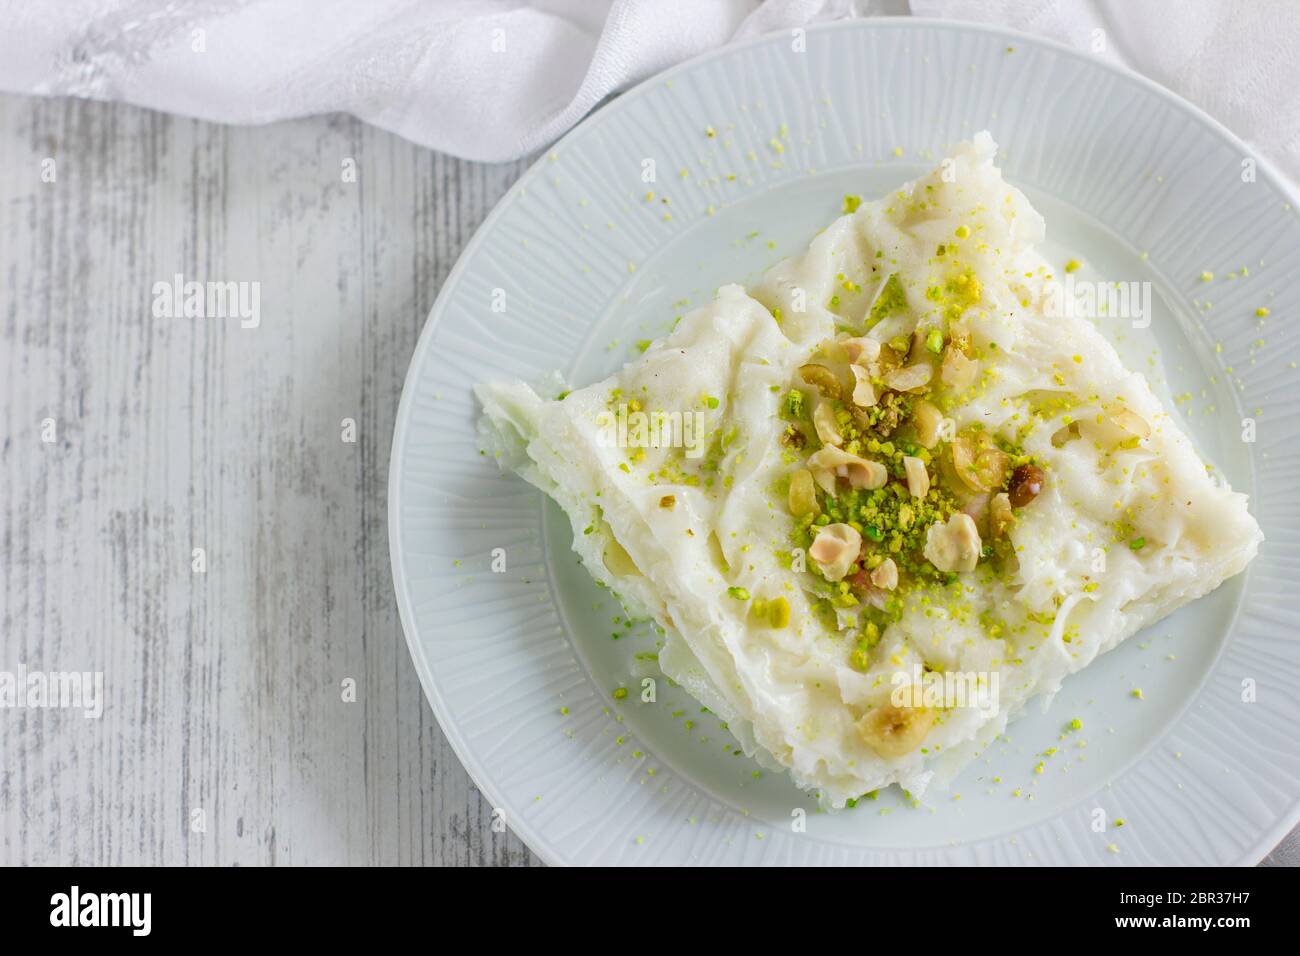 Traditional turkish meal - Gullac. Milk dessert sprinkled with ground nuts and pistachios. Ramadan dish Stock Photo